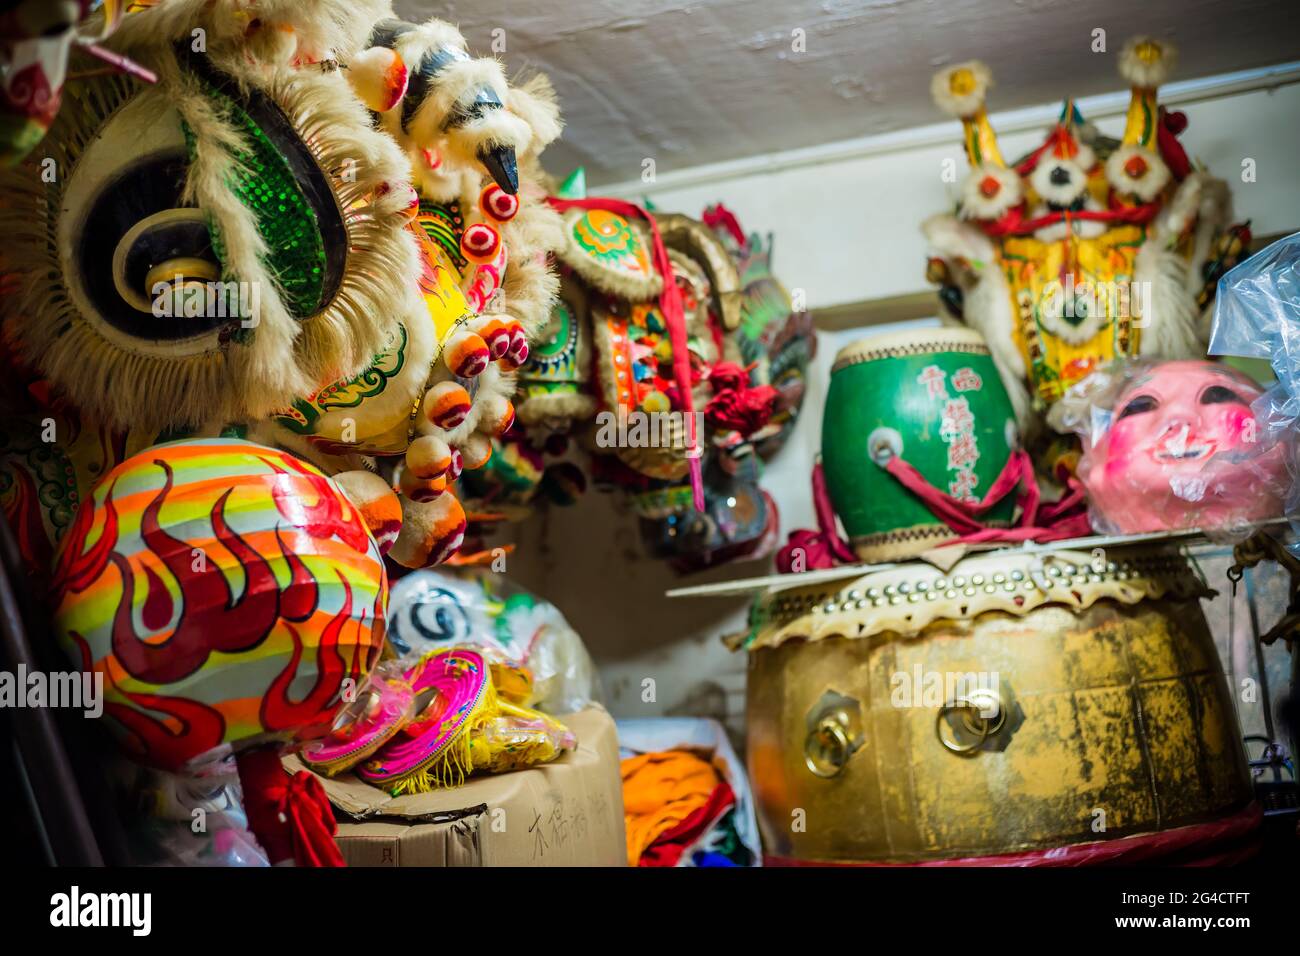 The heads of Lion and Dragon Dance costumes, drums and other items used for performances at festivals such as Chinese New Year, Sai Kung, New Territor Stock Photo